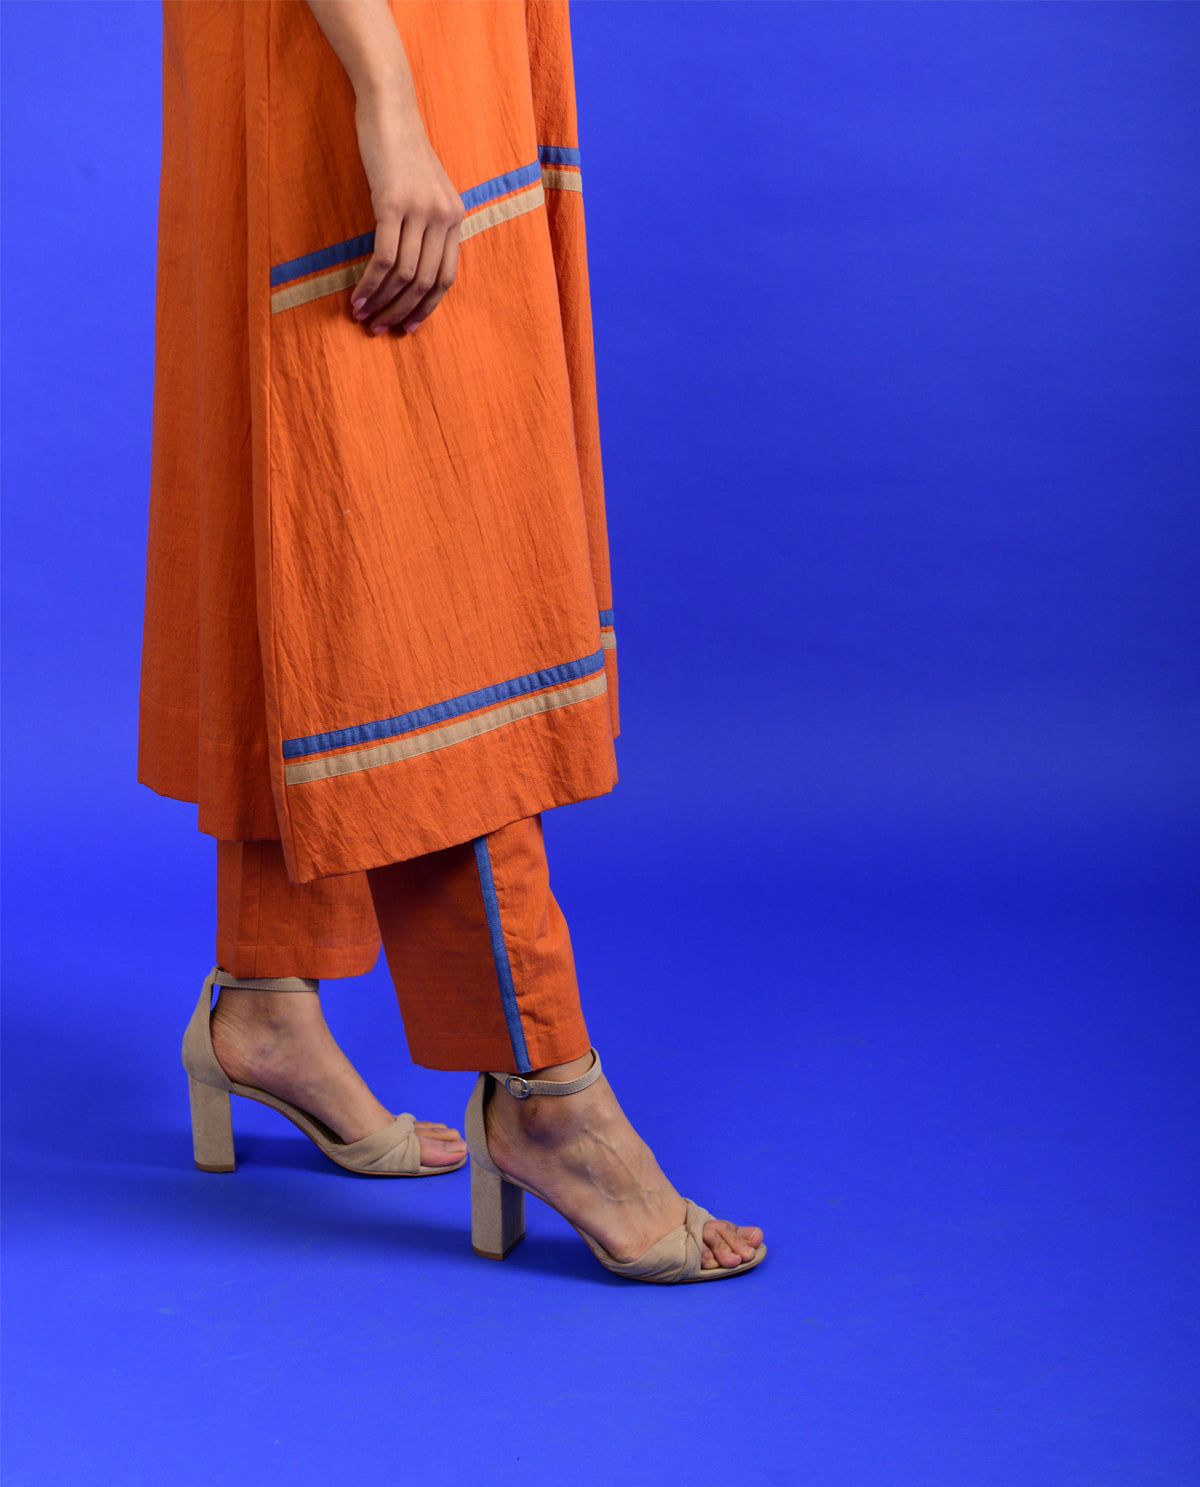 Orange Cotton Co-ord Set at Kamakhyaa by Rias Jaipur. This item is Casual Wear, Co-ord Sets, Handloom Cotton, Handspun, Handwoven, Hue, Orange, Regular Fit, Stripes, Travel, Travel Co-ords, Womenswear